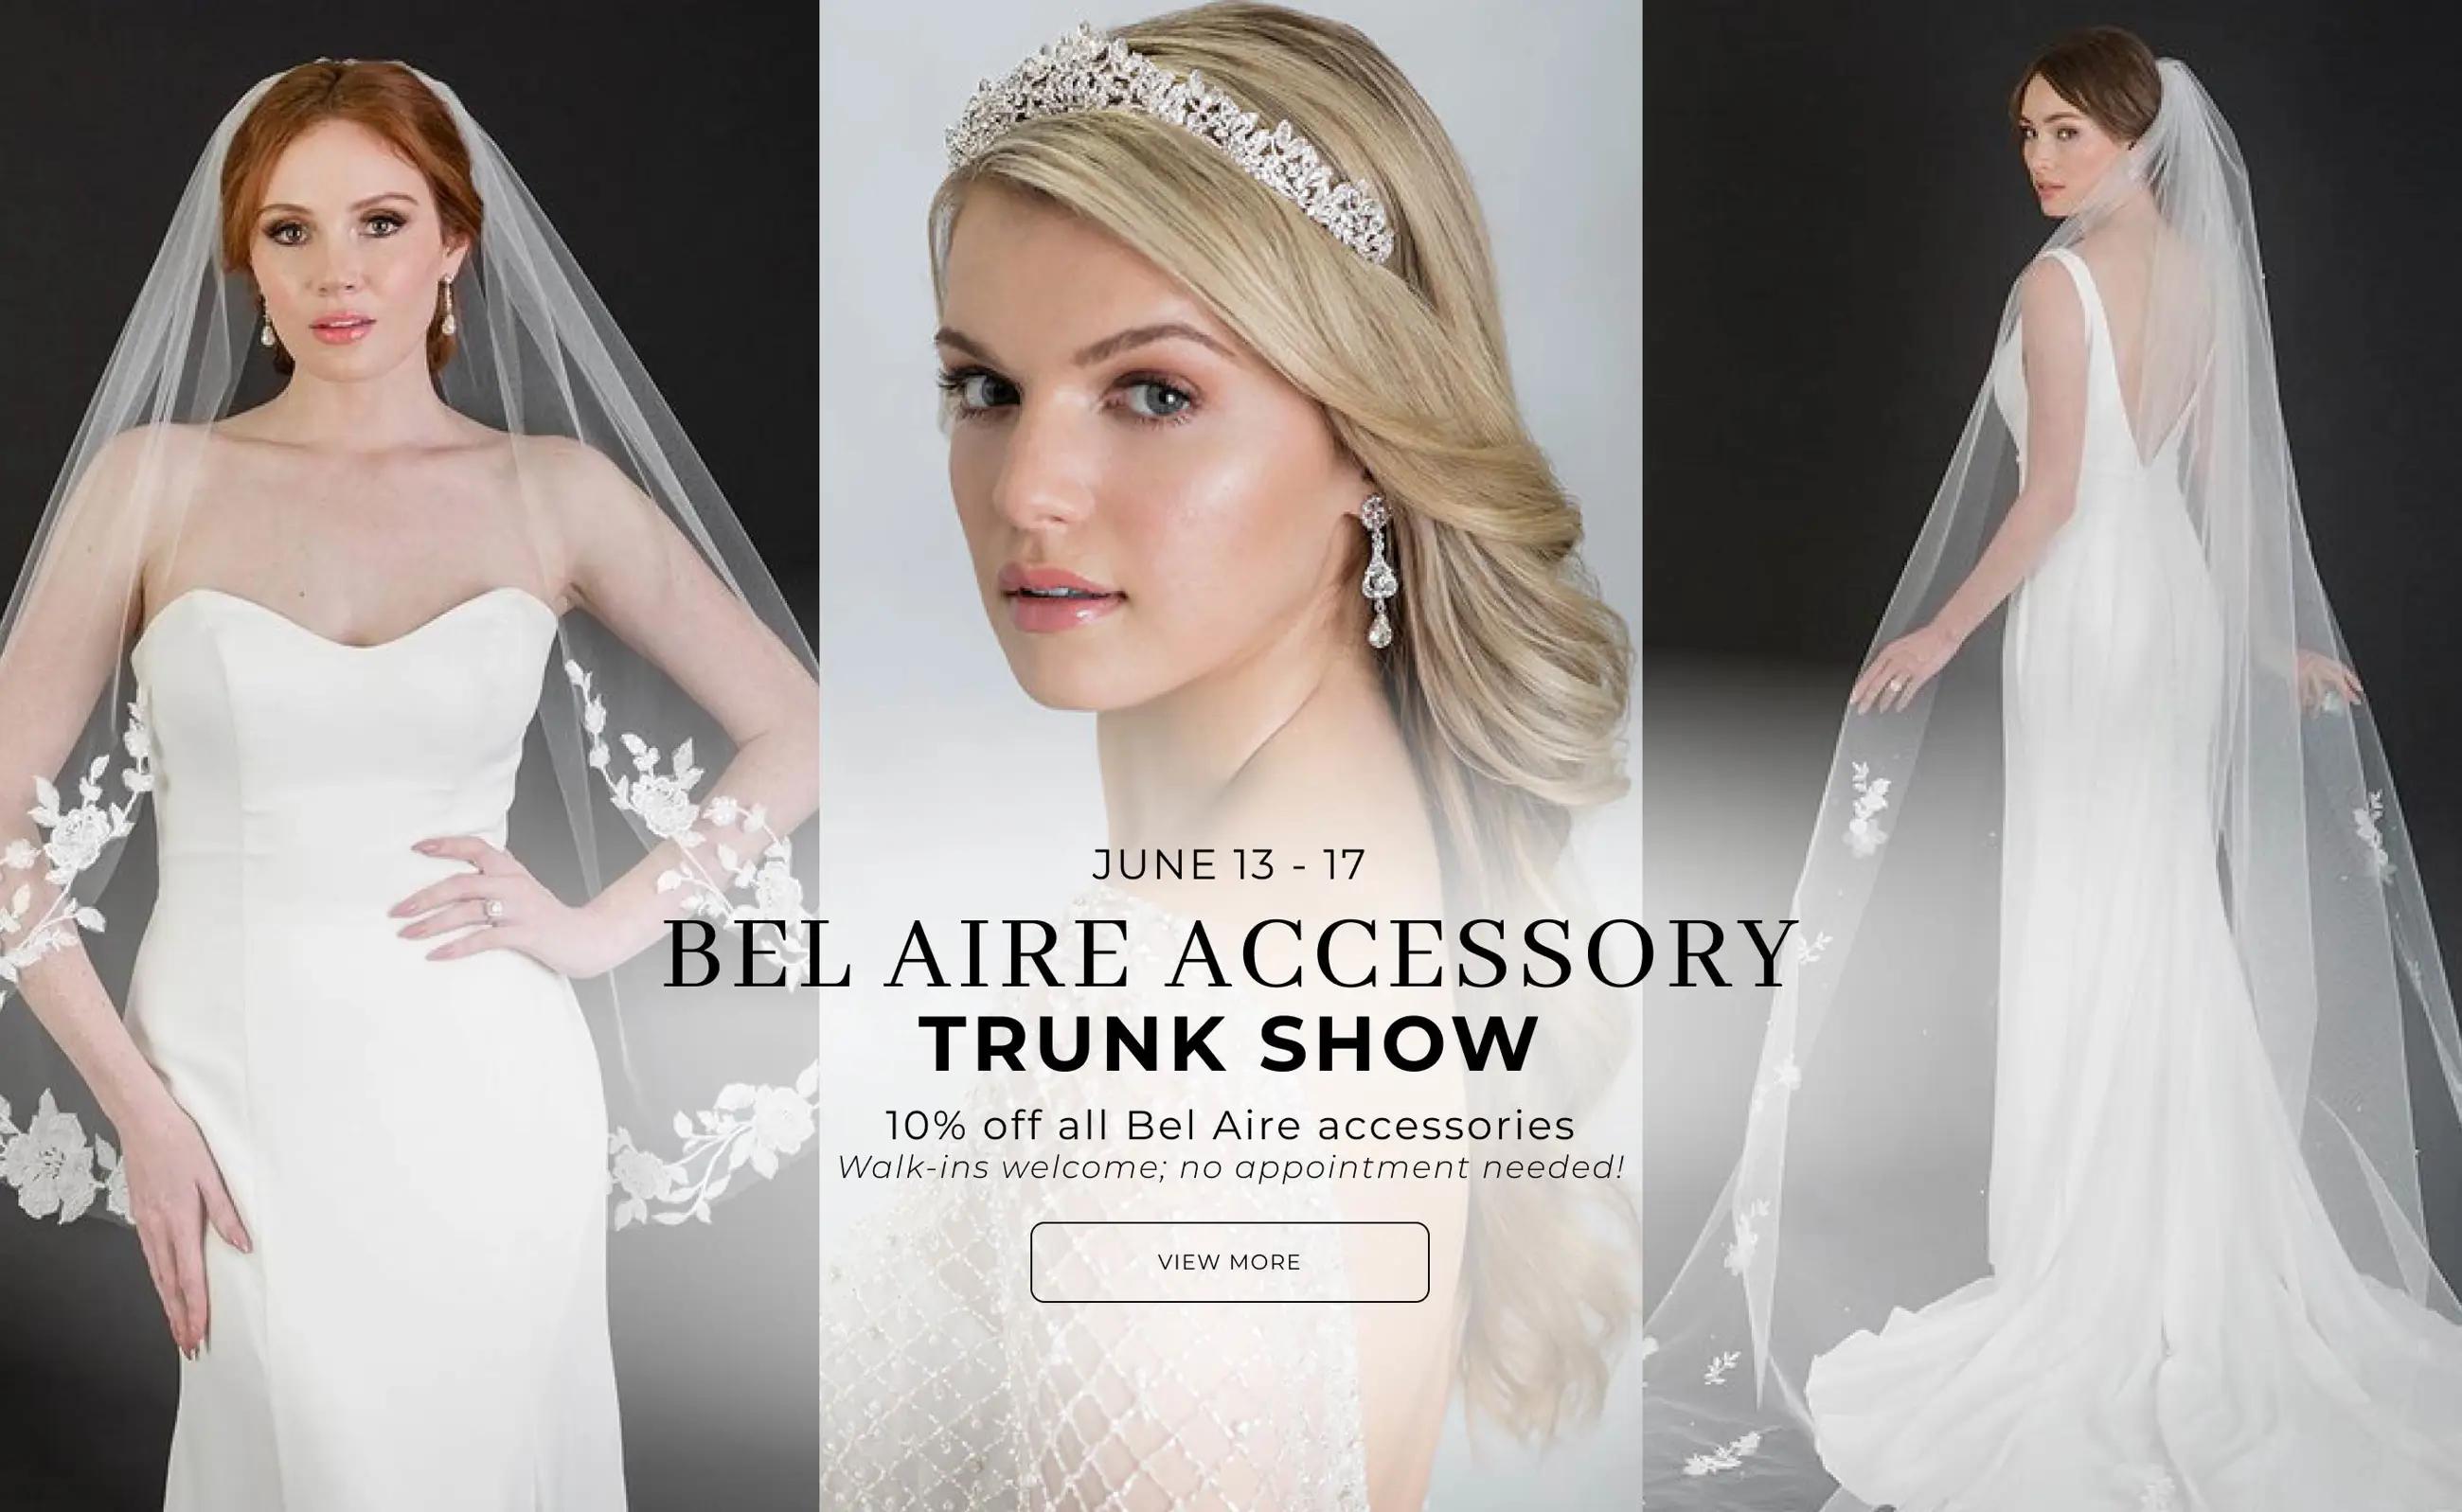 Bel Aire Accessory Trunk Show banner